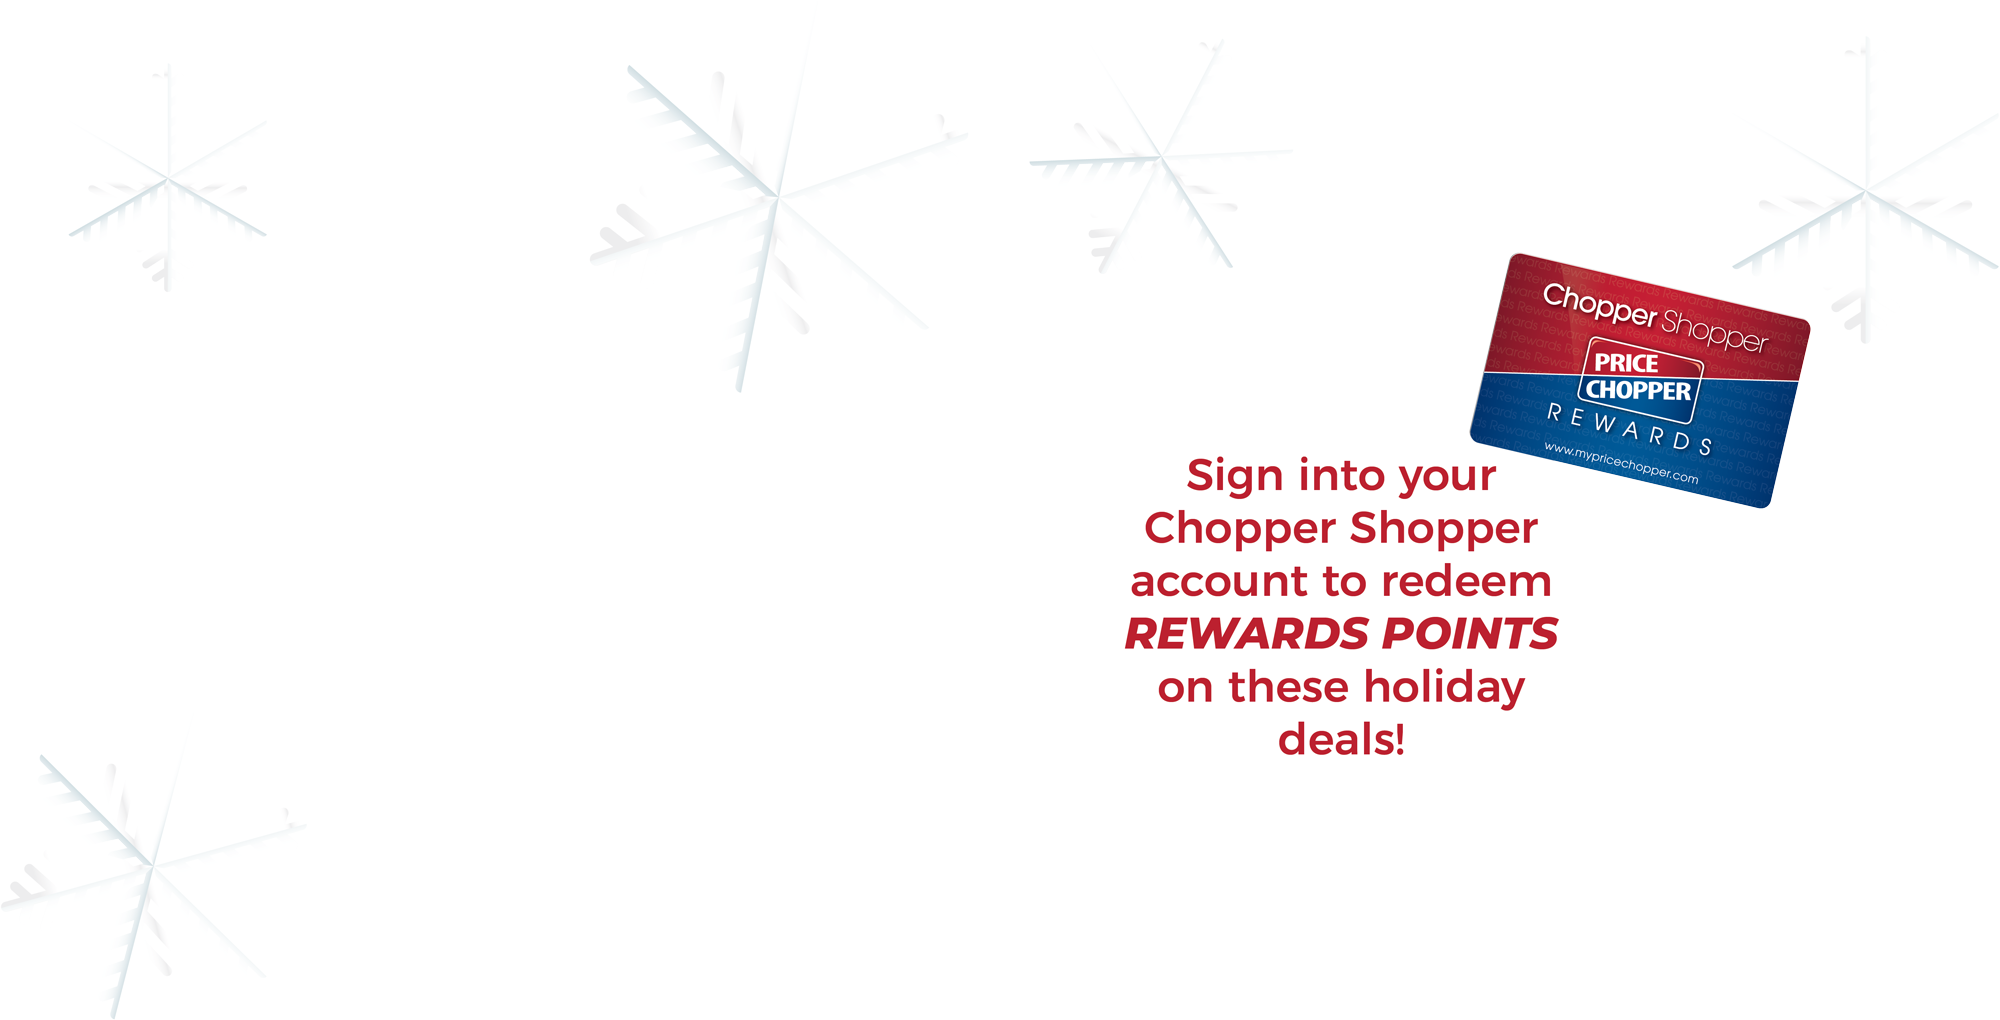 Sign into your Chopper Shopper account to redeem REWARDS POINTS on these holiday deals